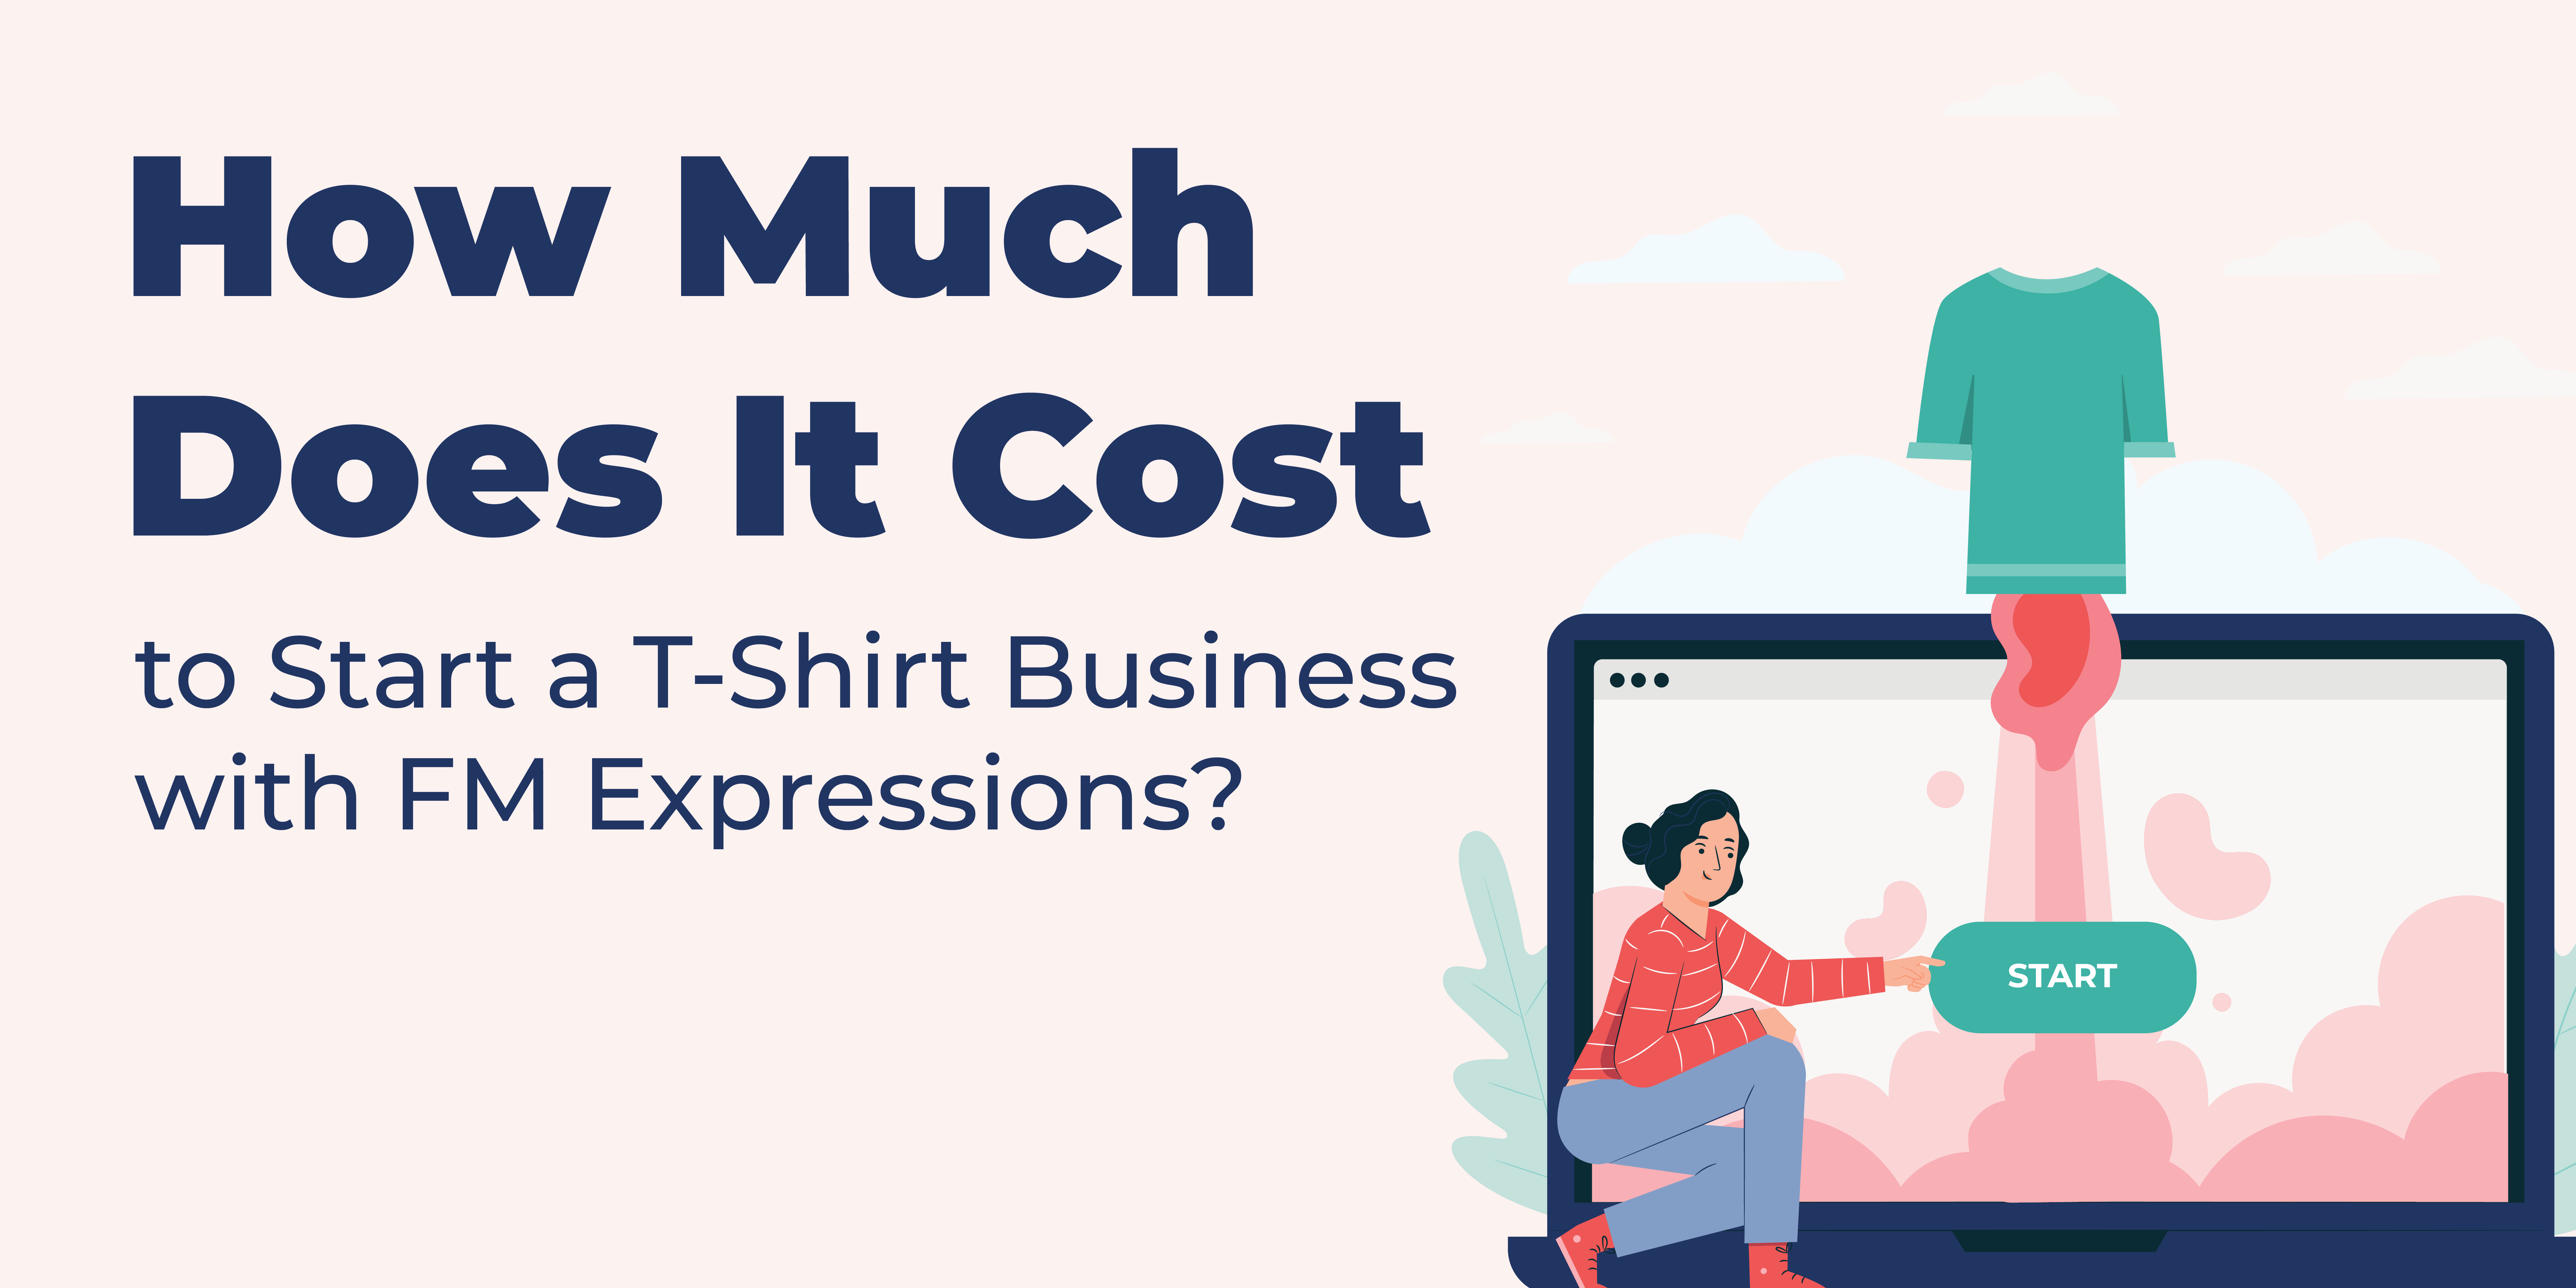 How Much Does It Cost to Start a T Shirt Business with FM Expressions